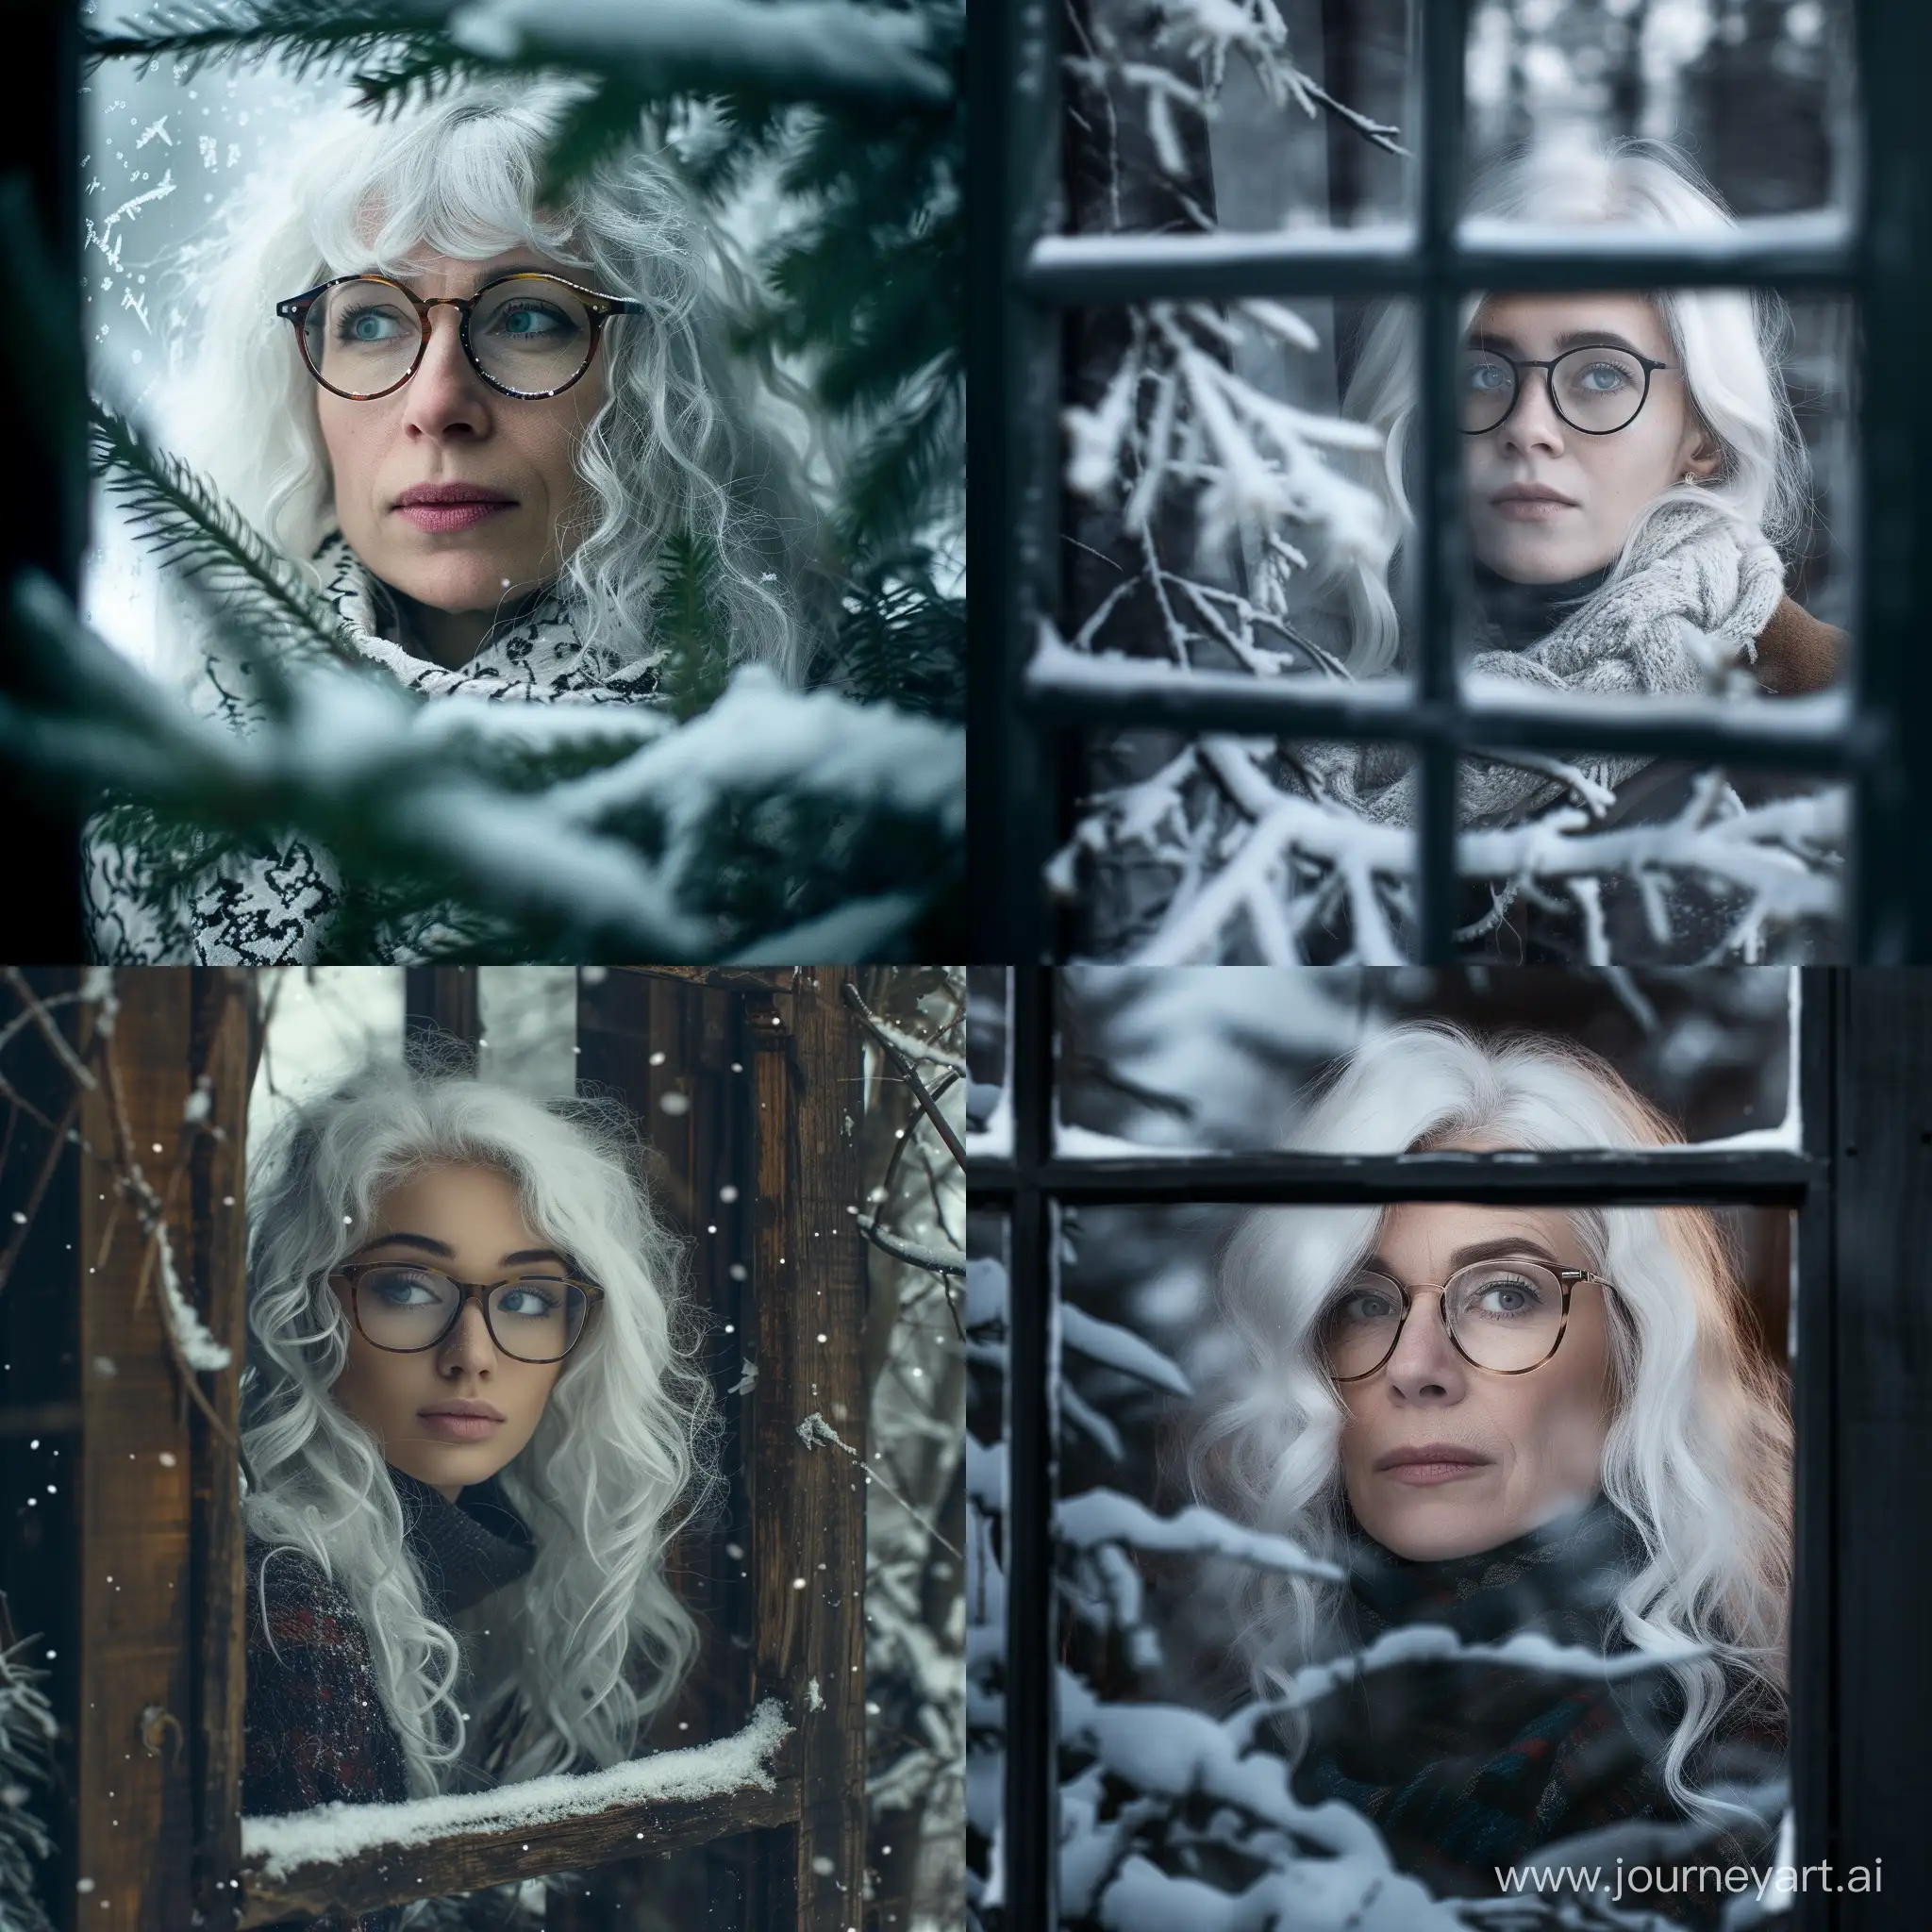 create a real white hair woman with glasses watching through window snowy forrest 